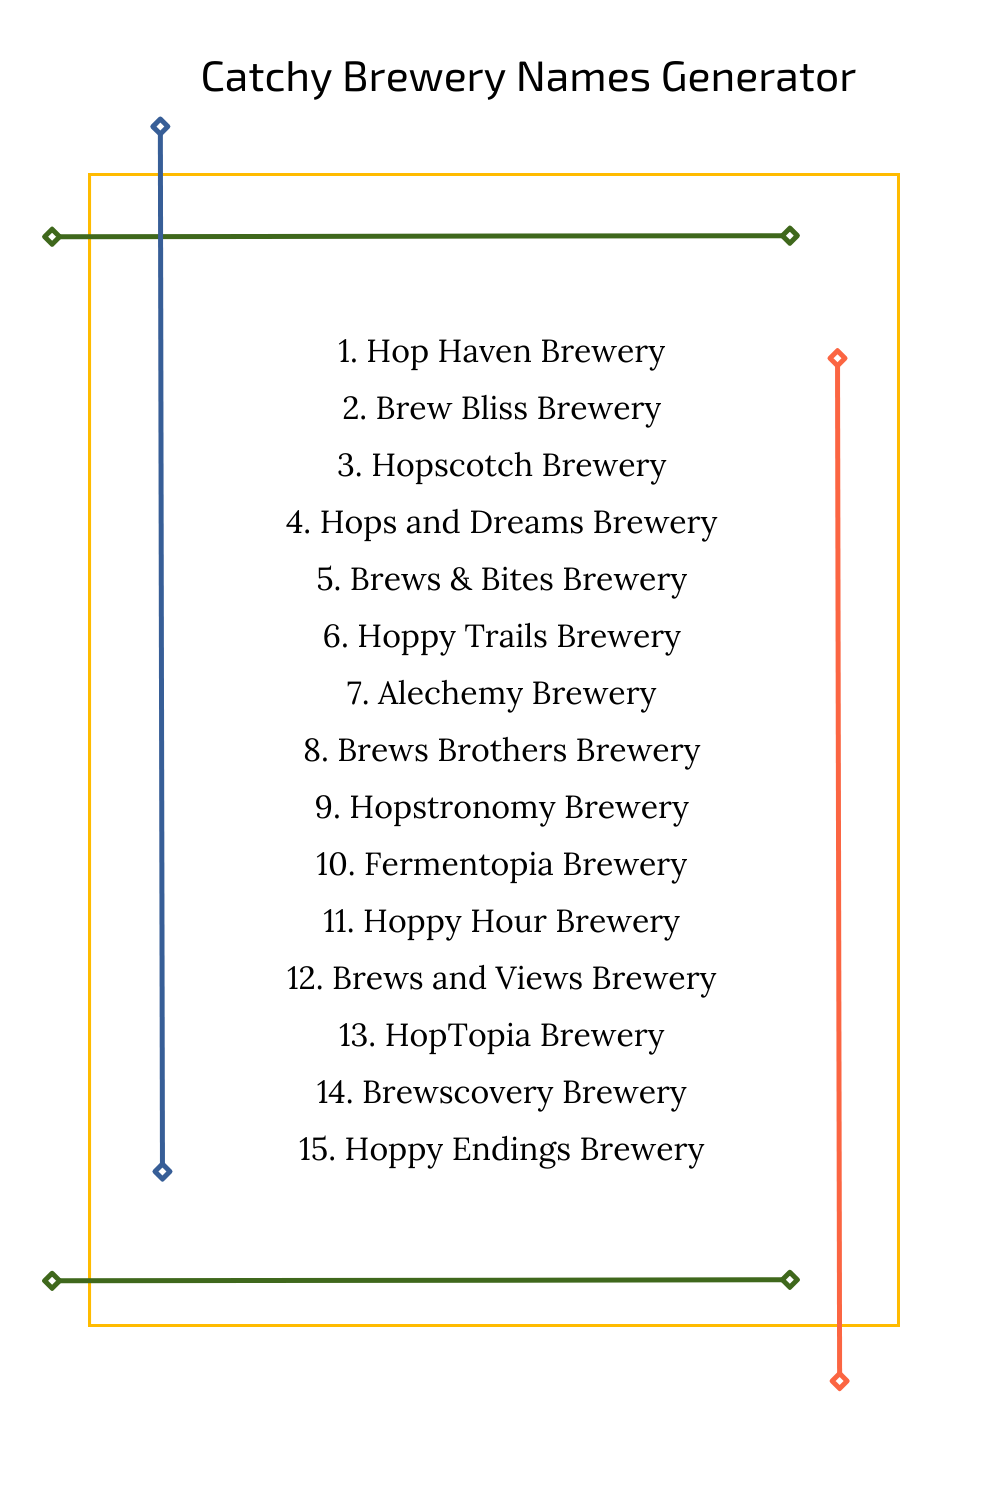 Catchy Brewery Names Generator